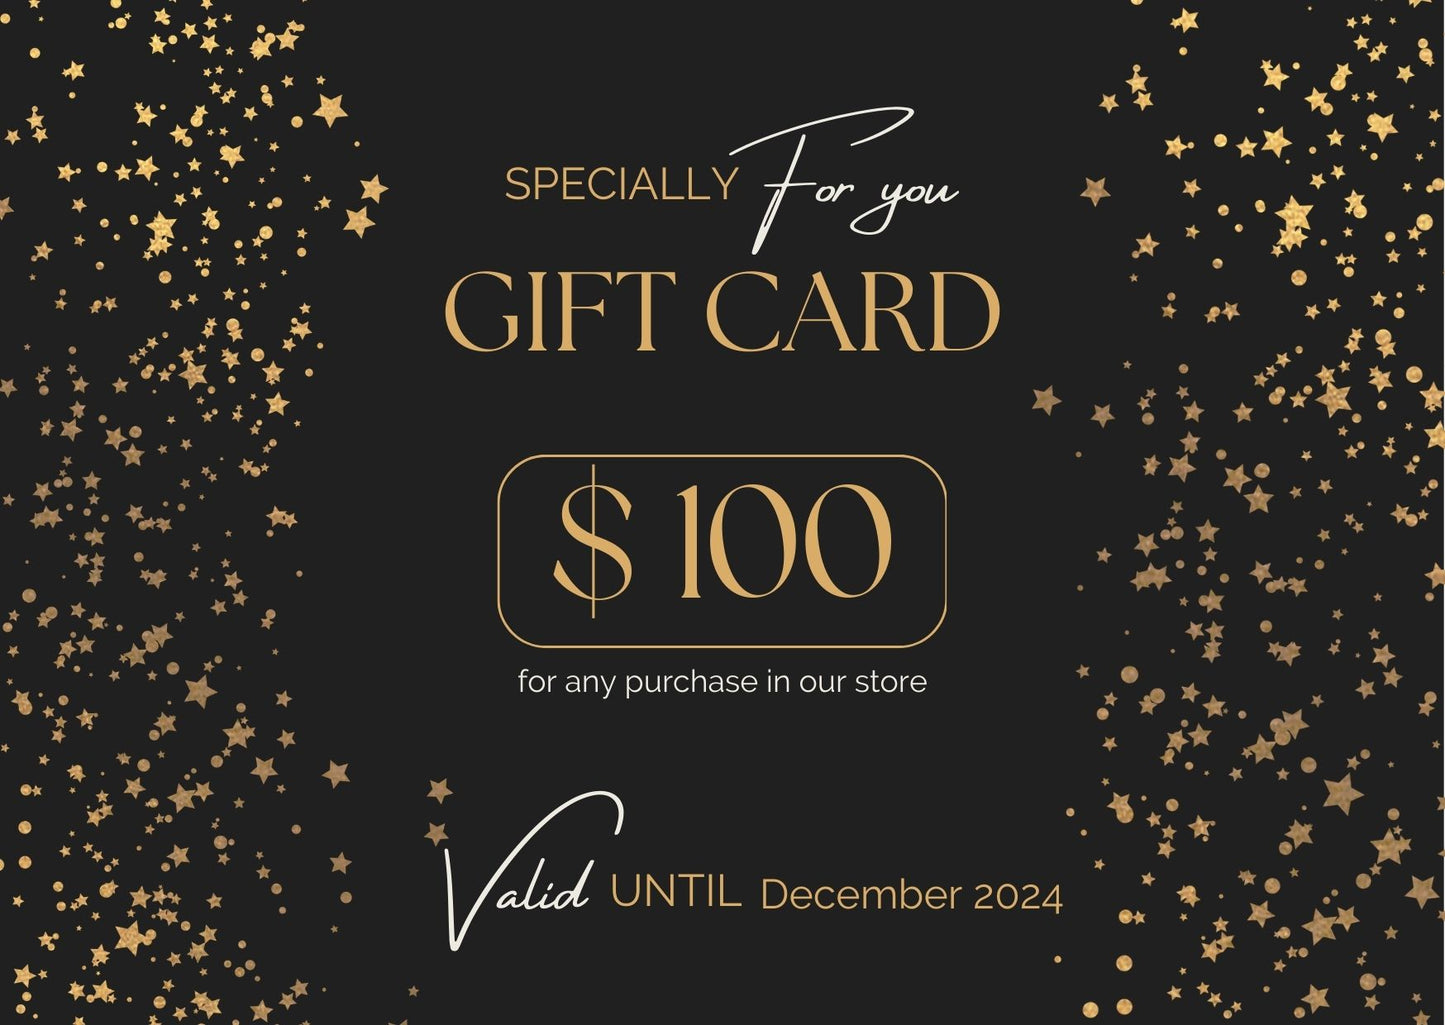 steamystories gift card